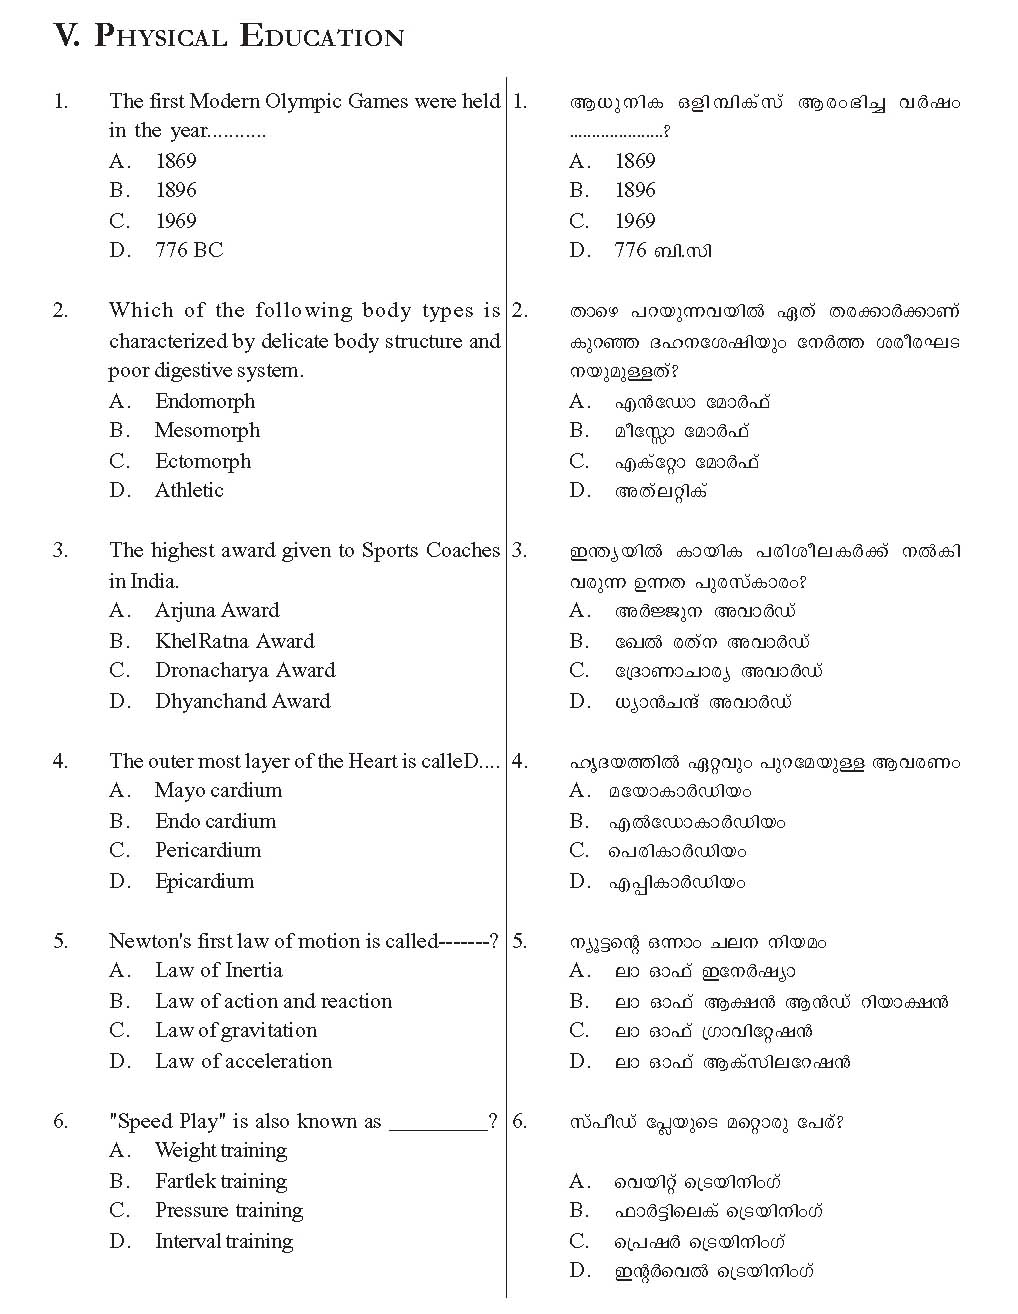 KTET Category IV Physical Education Sample Question Paper with Answers 2012 1